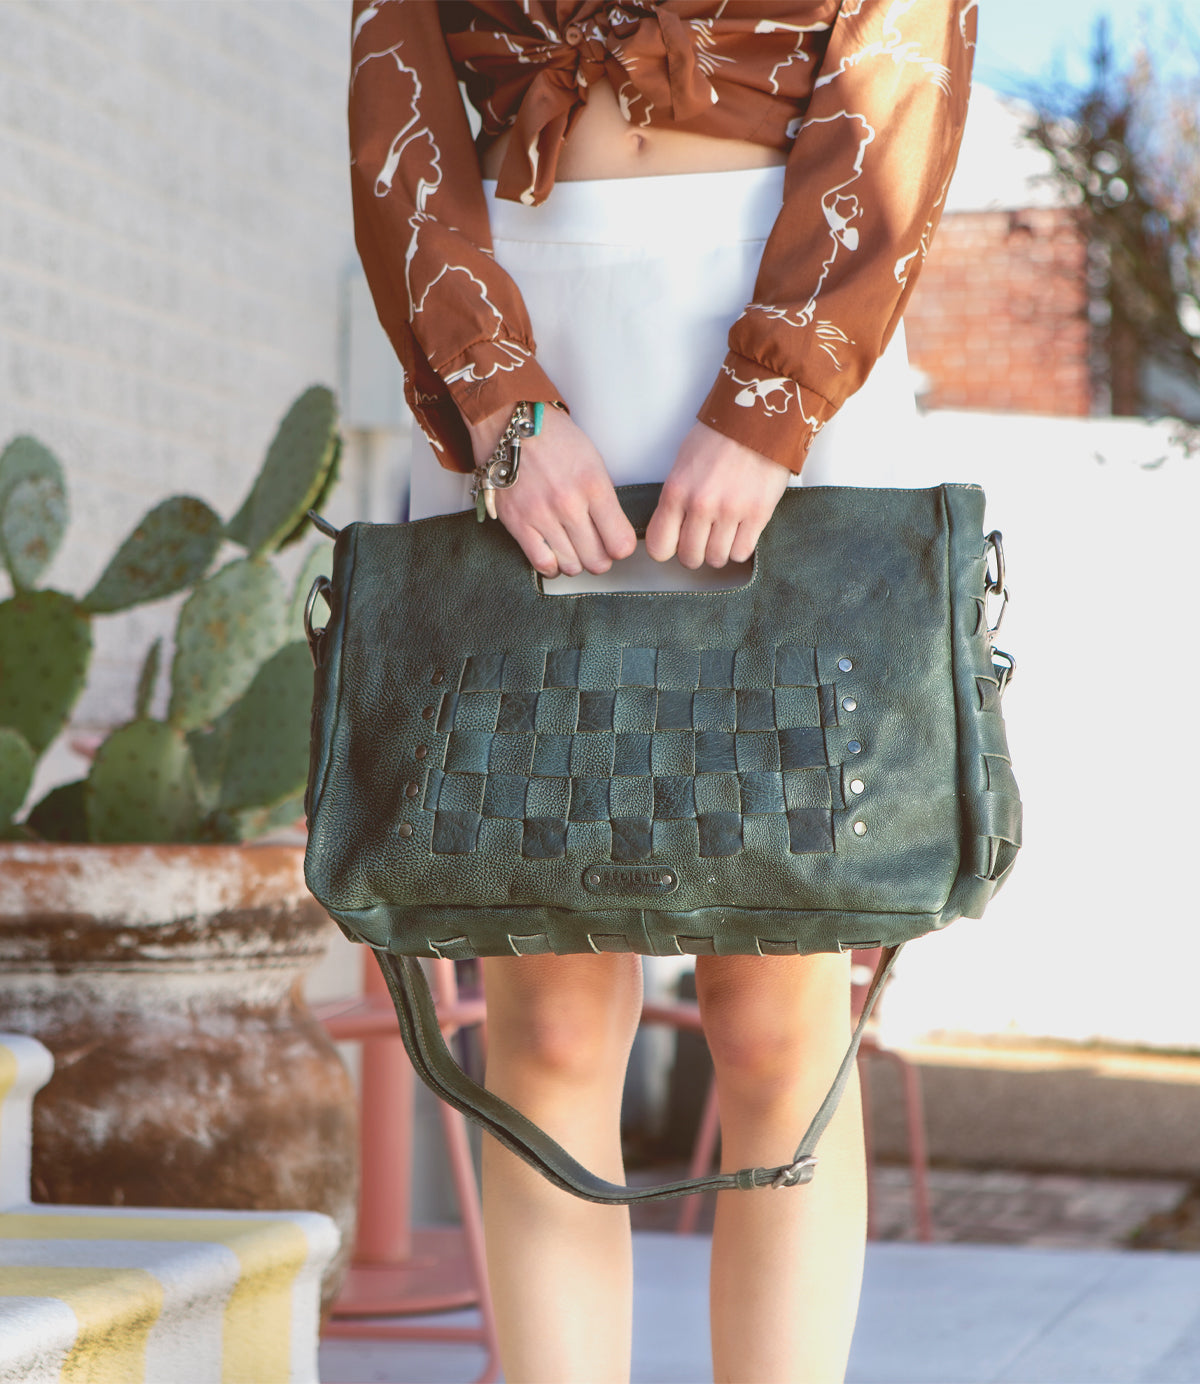 A woman is holding a Bed Stu Orchid L green leather bag.